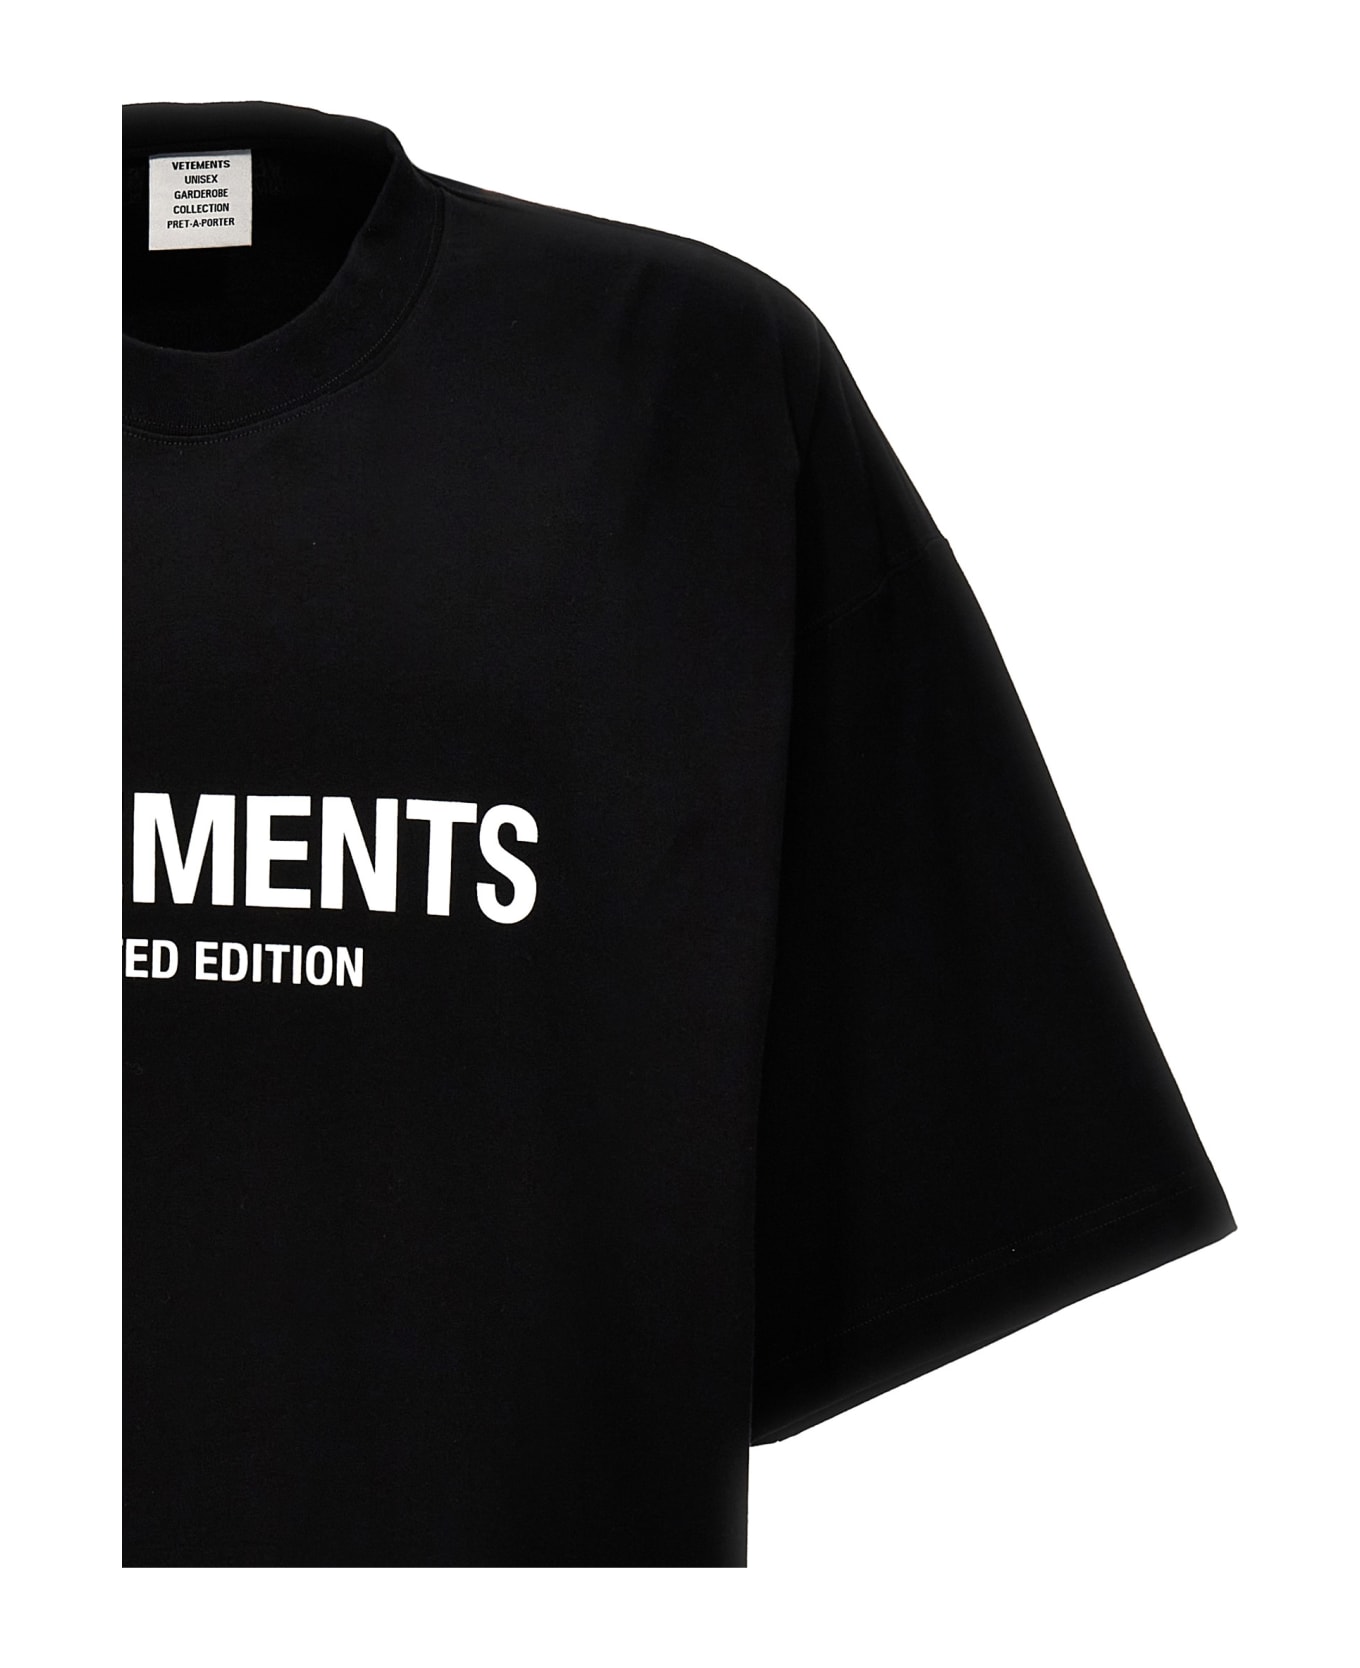 VETEMENTS 'limited Edition' T-shirt - White/Black Tシャツ